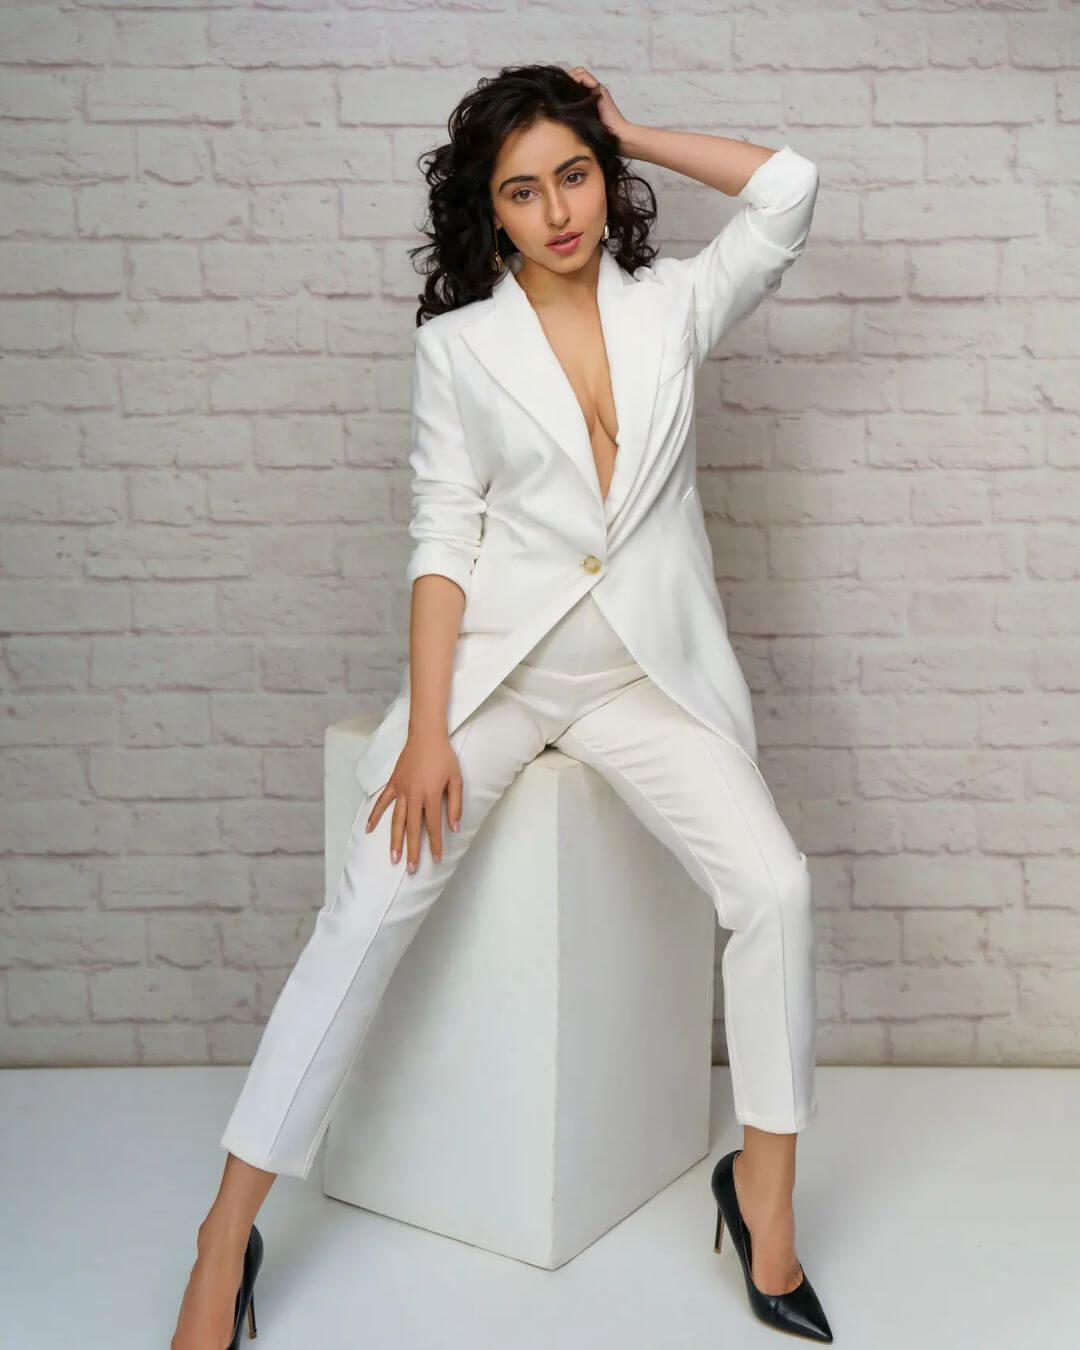 Niyati Fatnani Bold & Sexy Look In White Suit Paired With Black Pumps